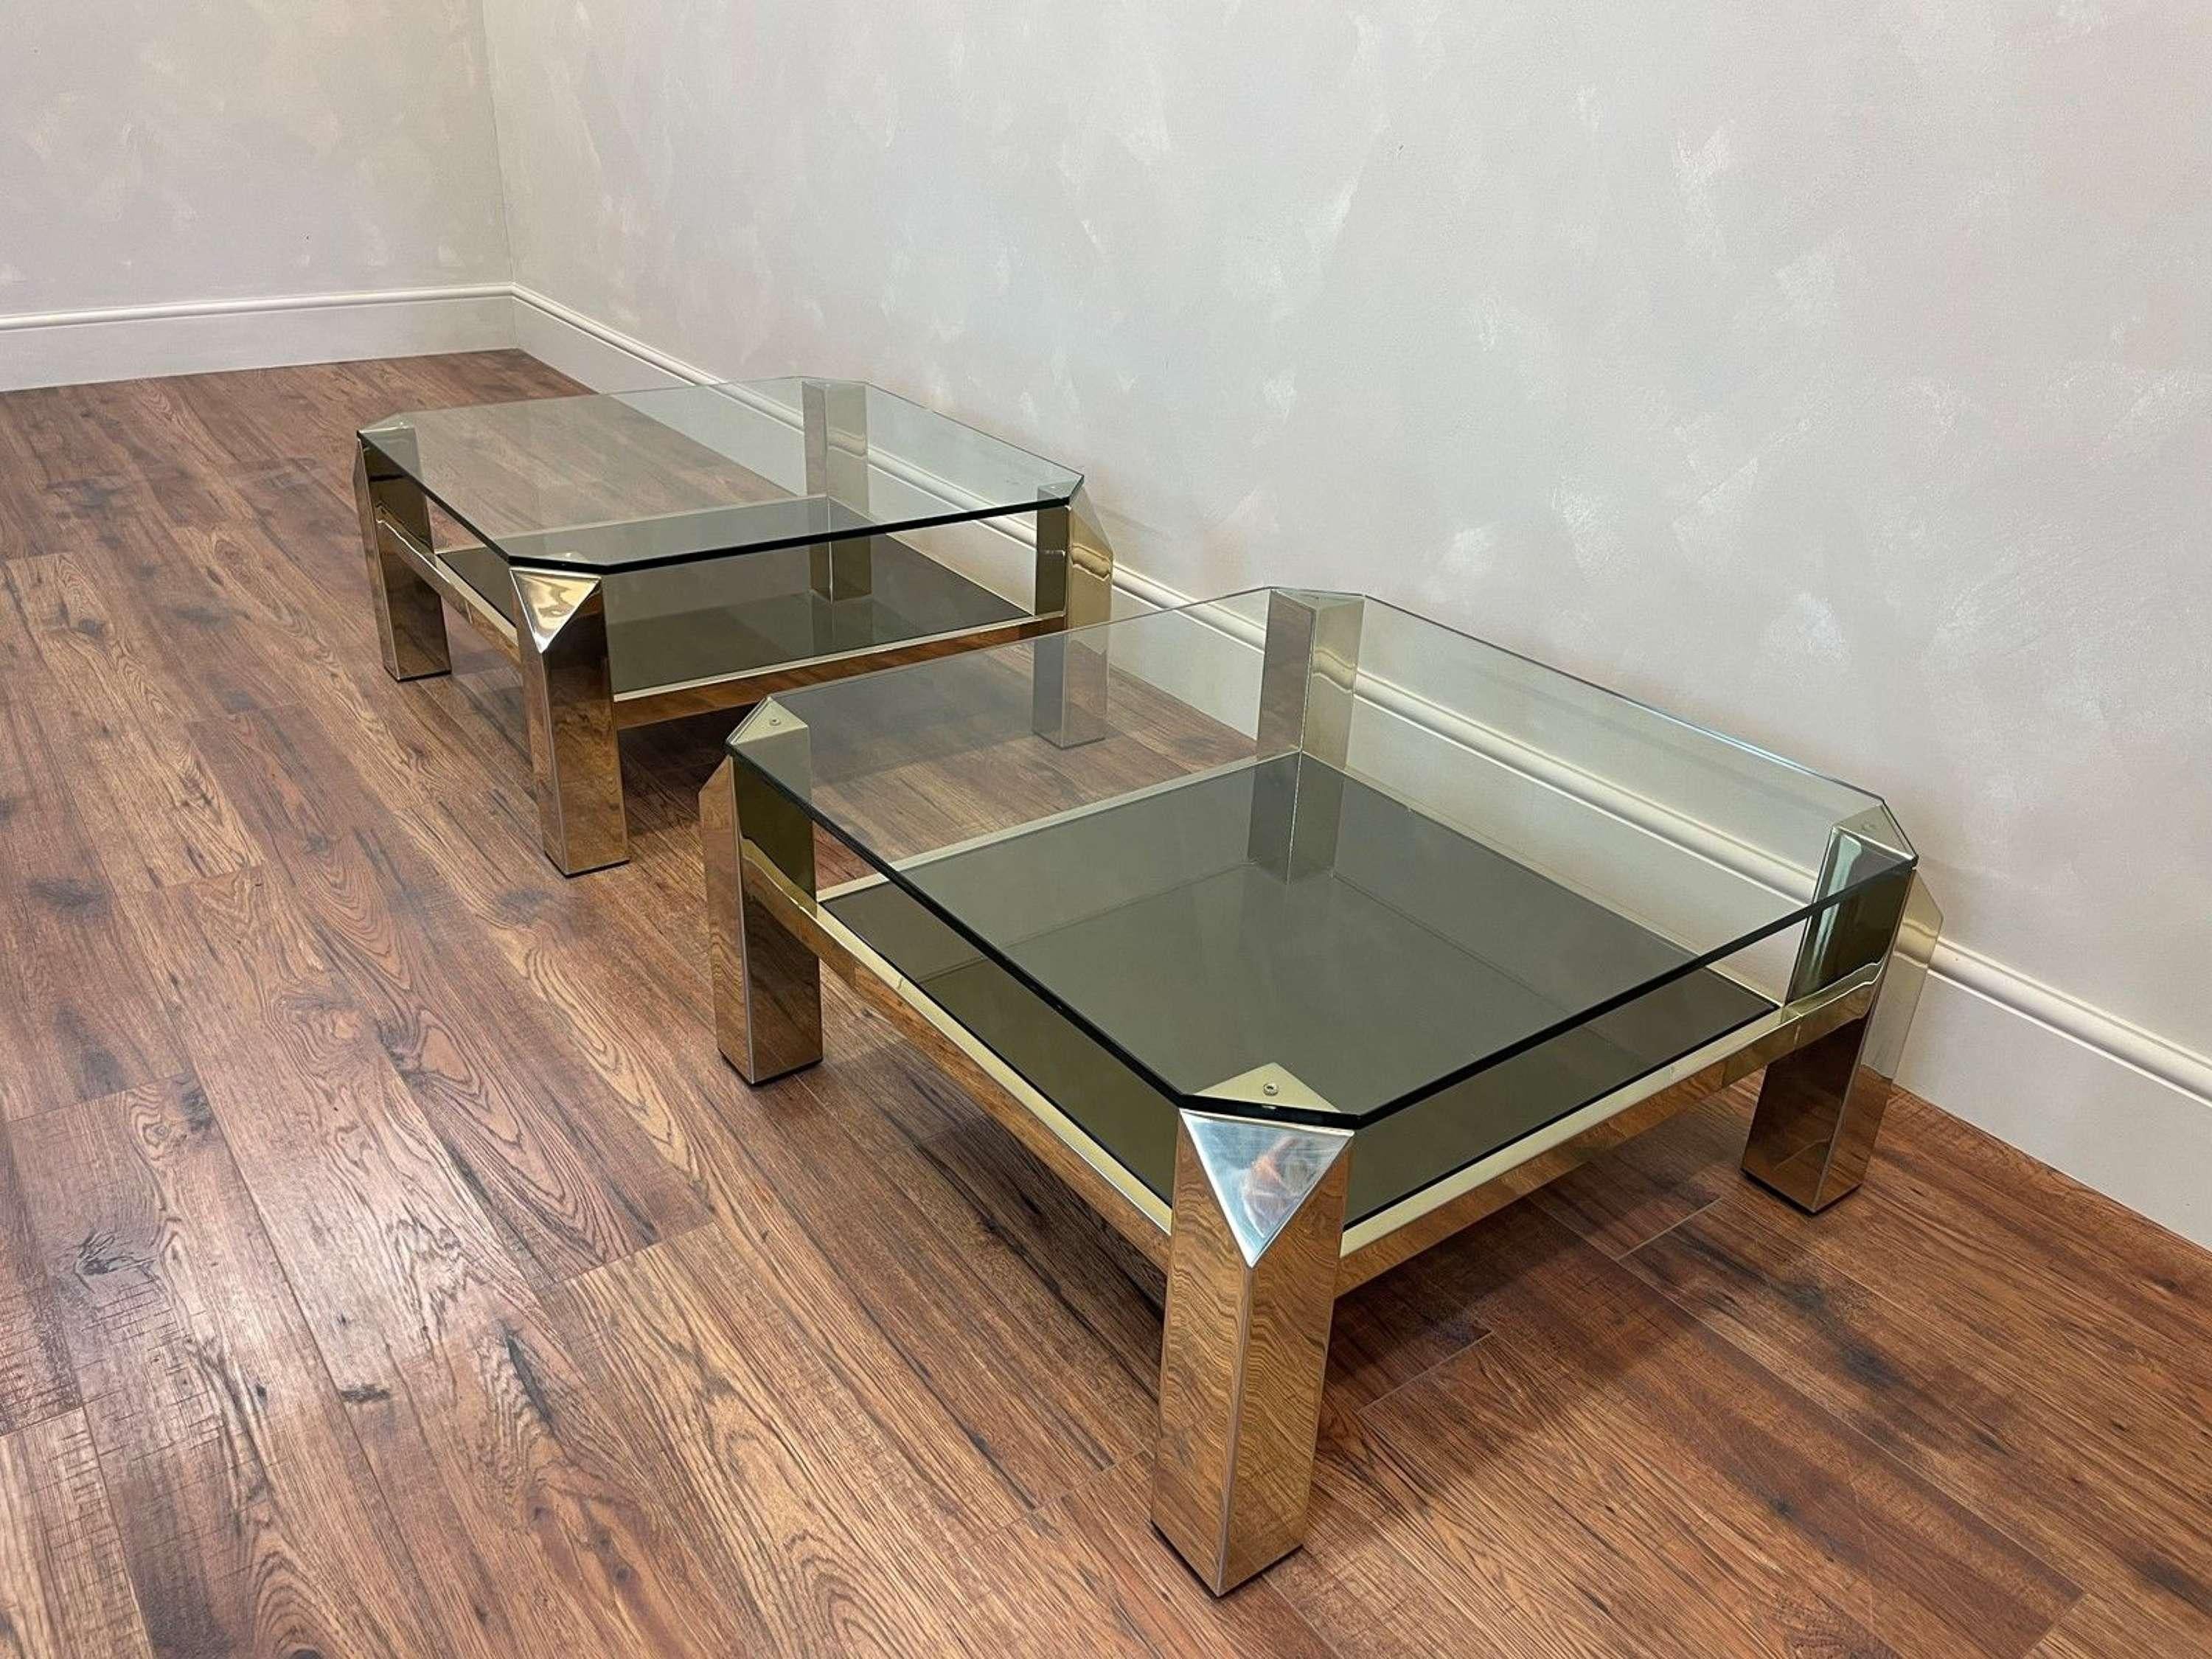 Late 20th Century Pair of 23 Carat Gold Plated, Coffee Tables Tables by Belgo Chrome, c1970